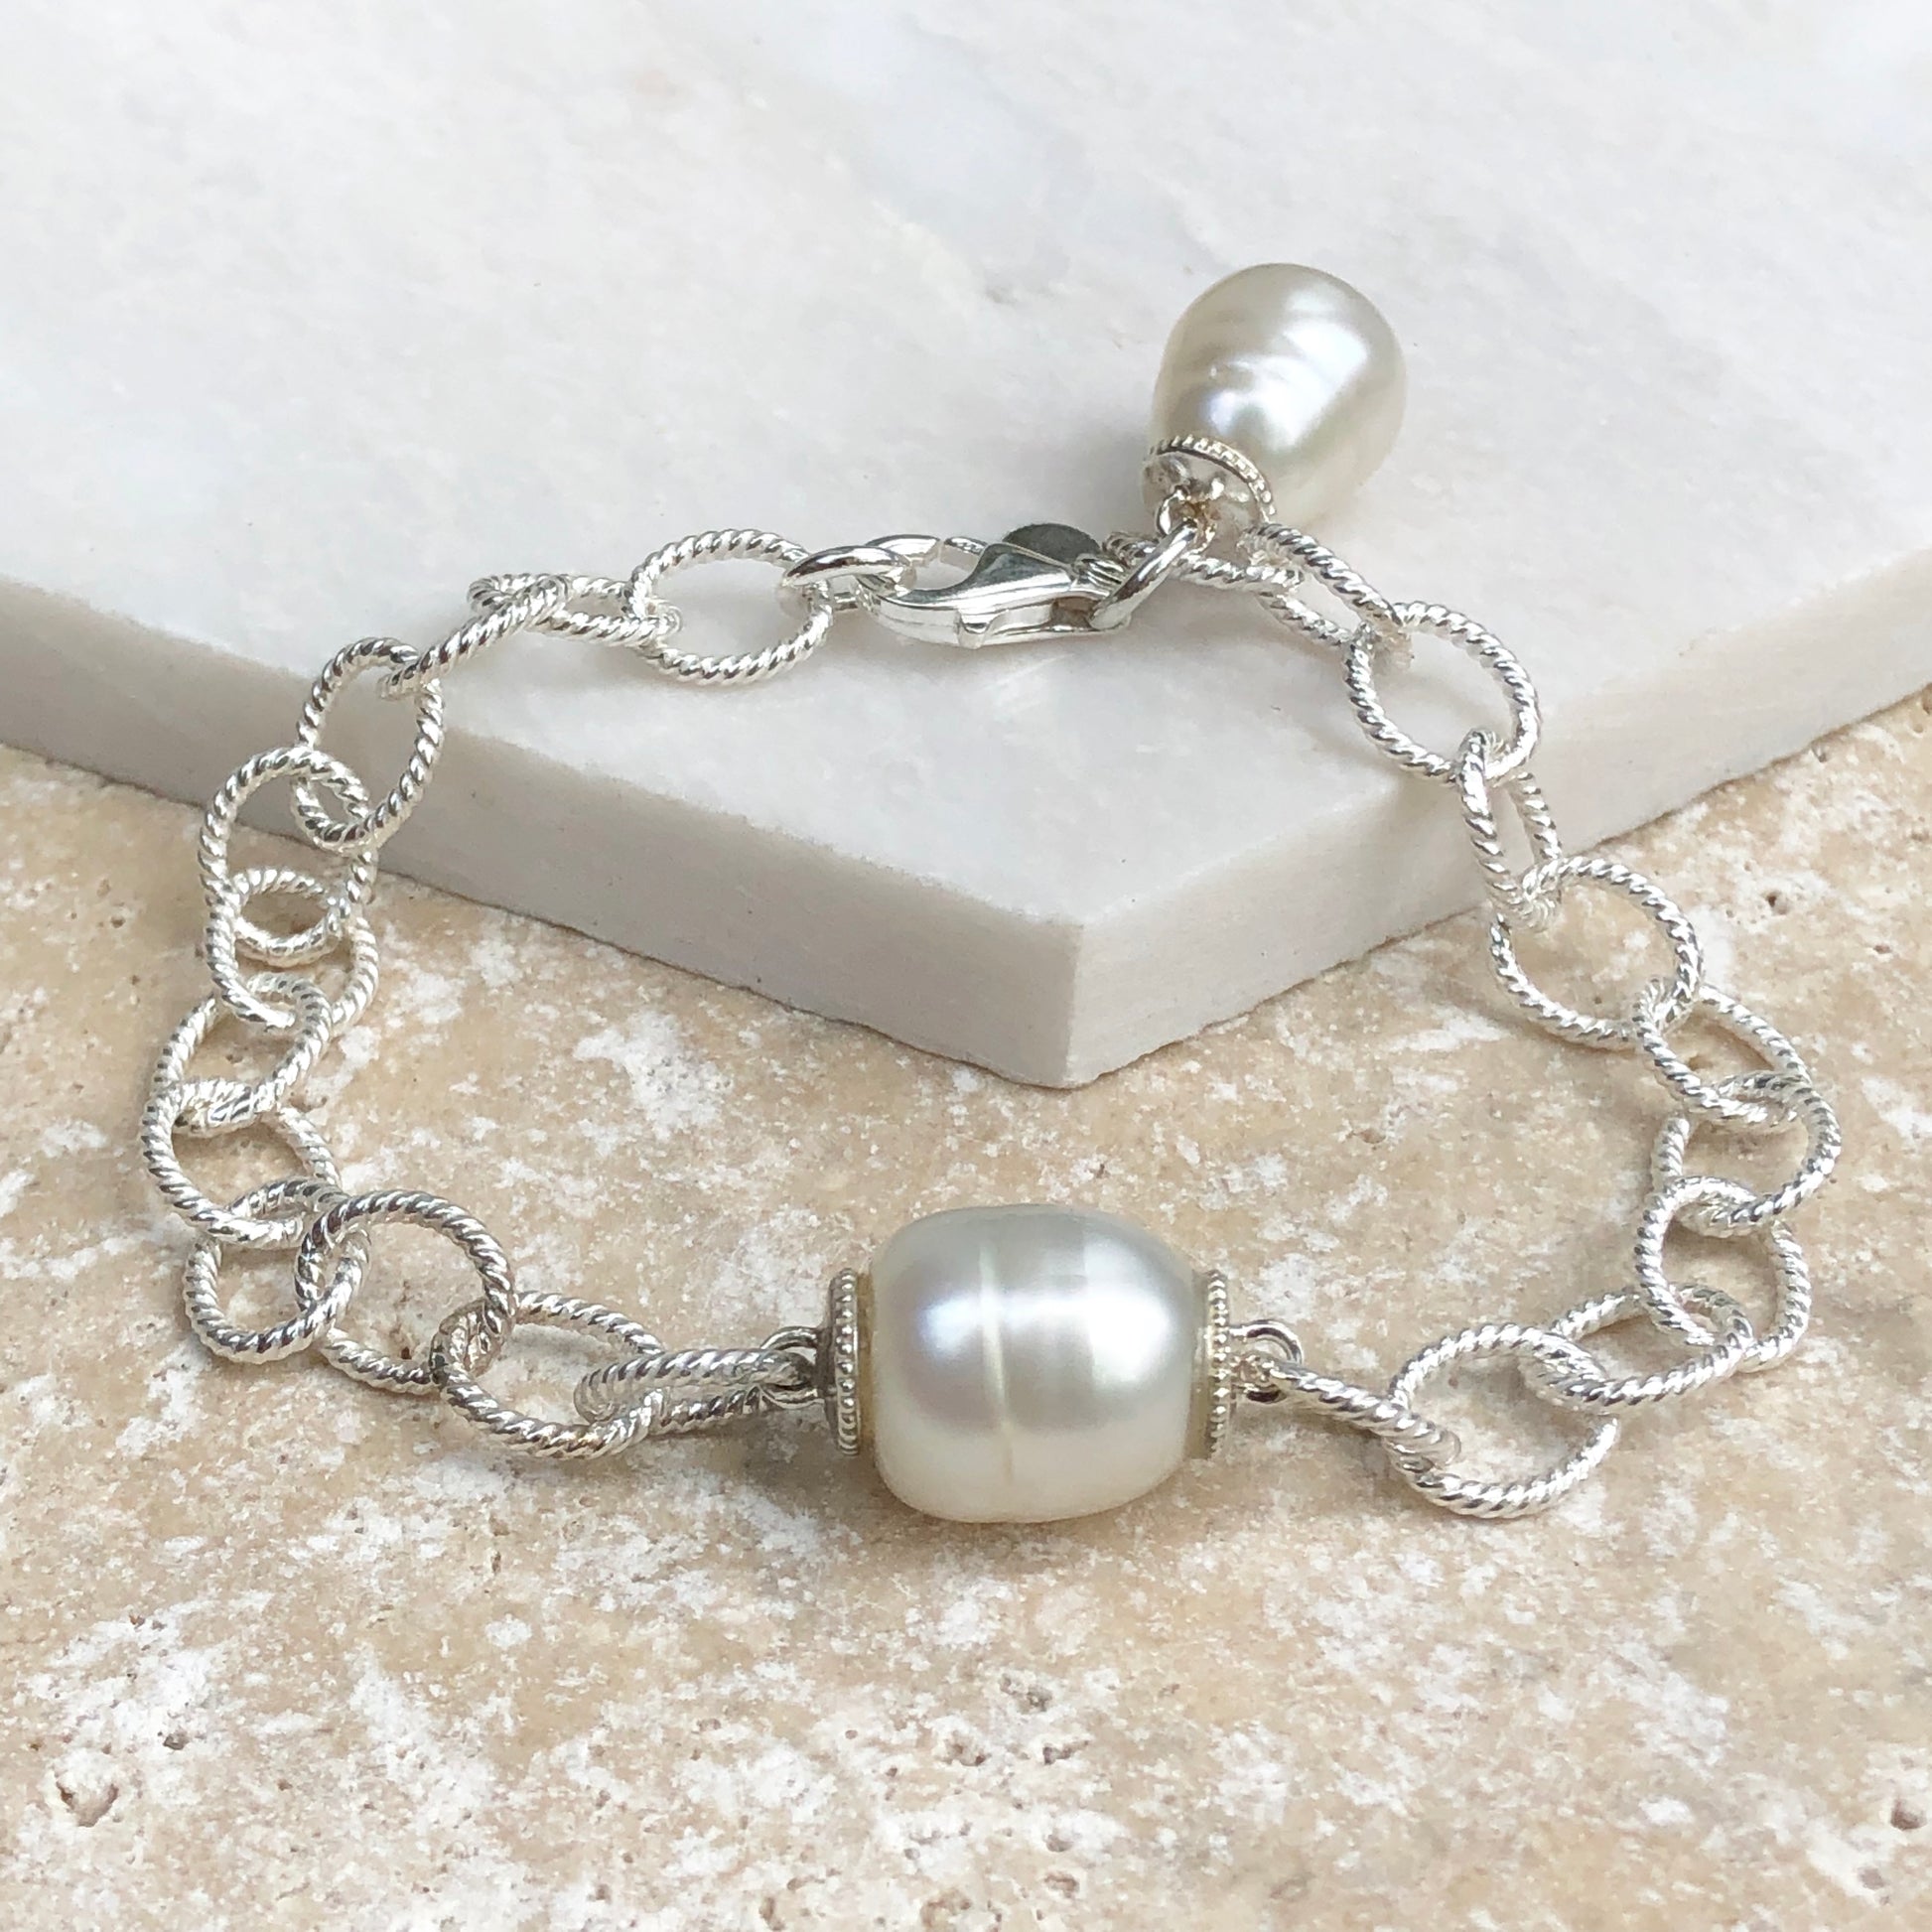 Sterling Silver Patterned Chain Link Paspaley Pearl Bracelet, Sterling Silver Patterned Chain Link Paspaley Pearl Bracelet - Legacy Saint Jewelry